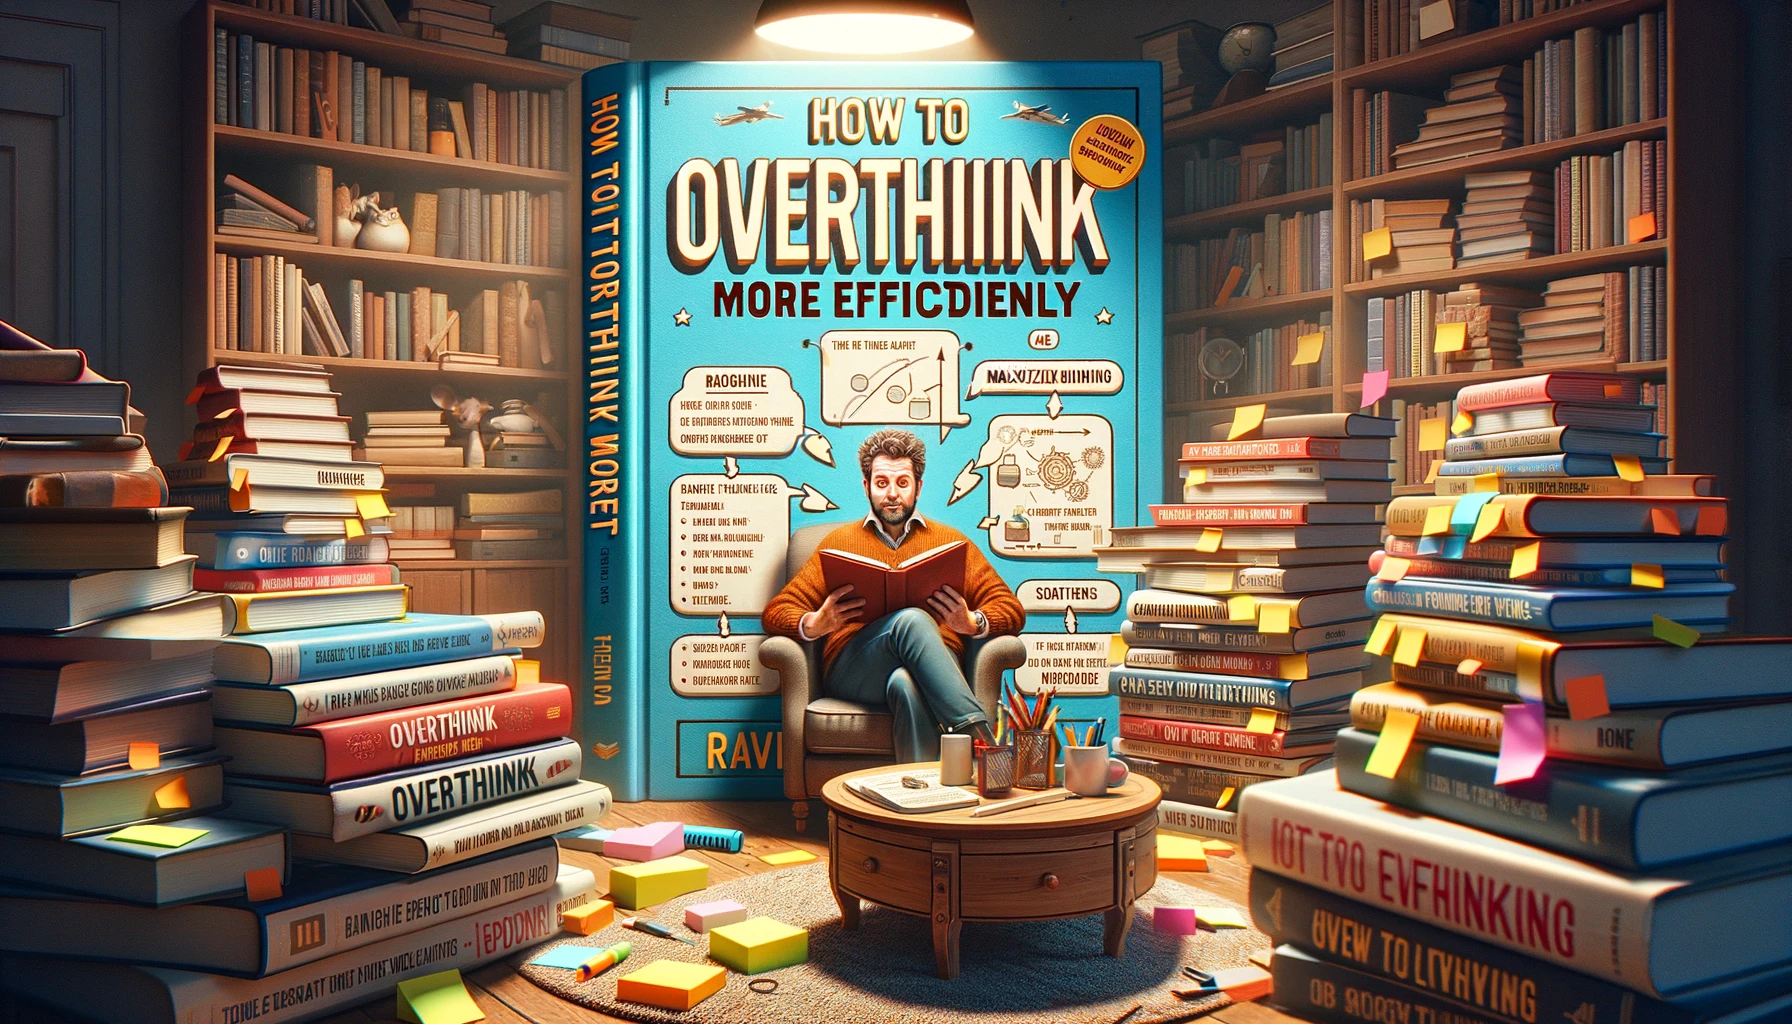 over-effectient-thinking-csdn